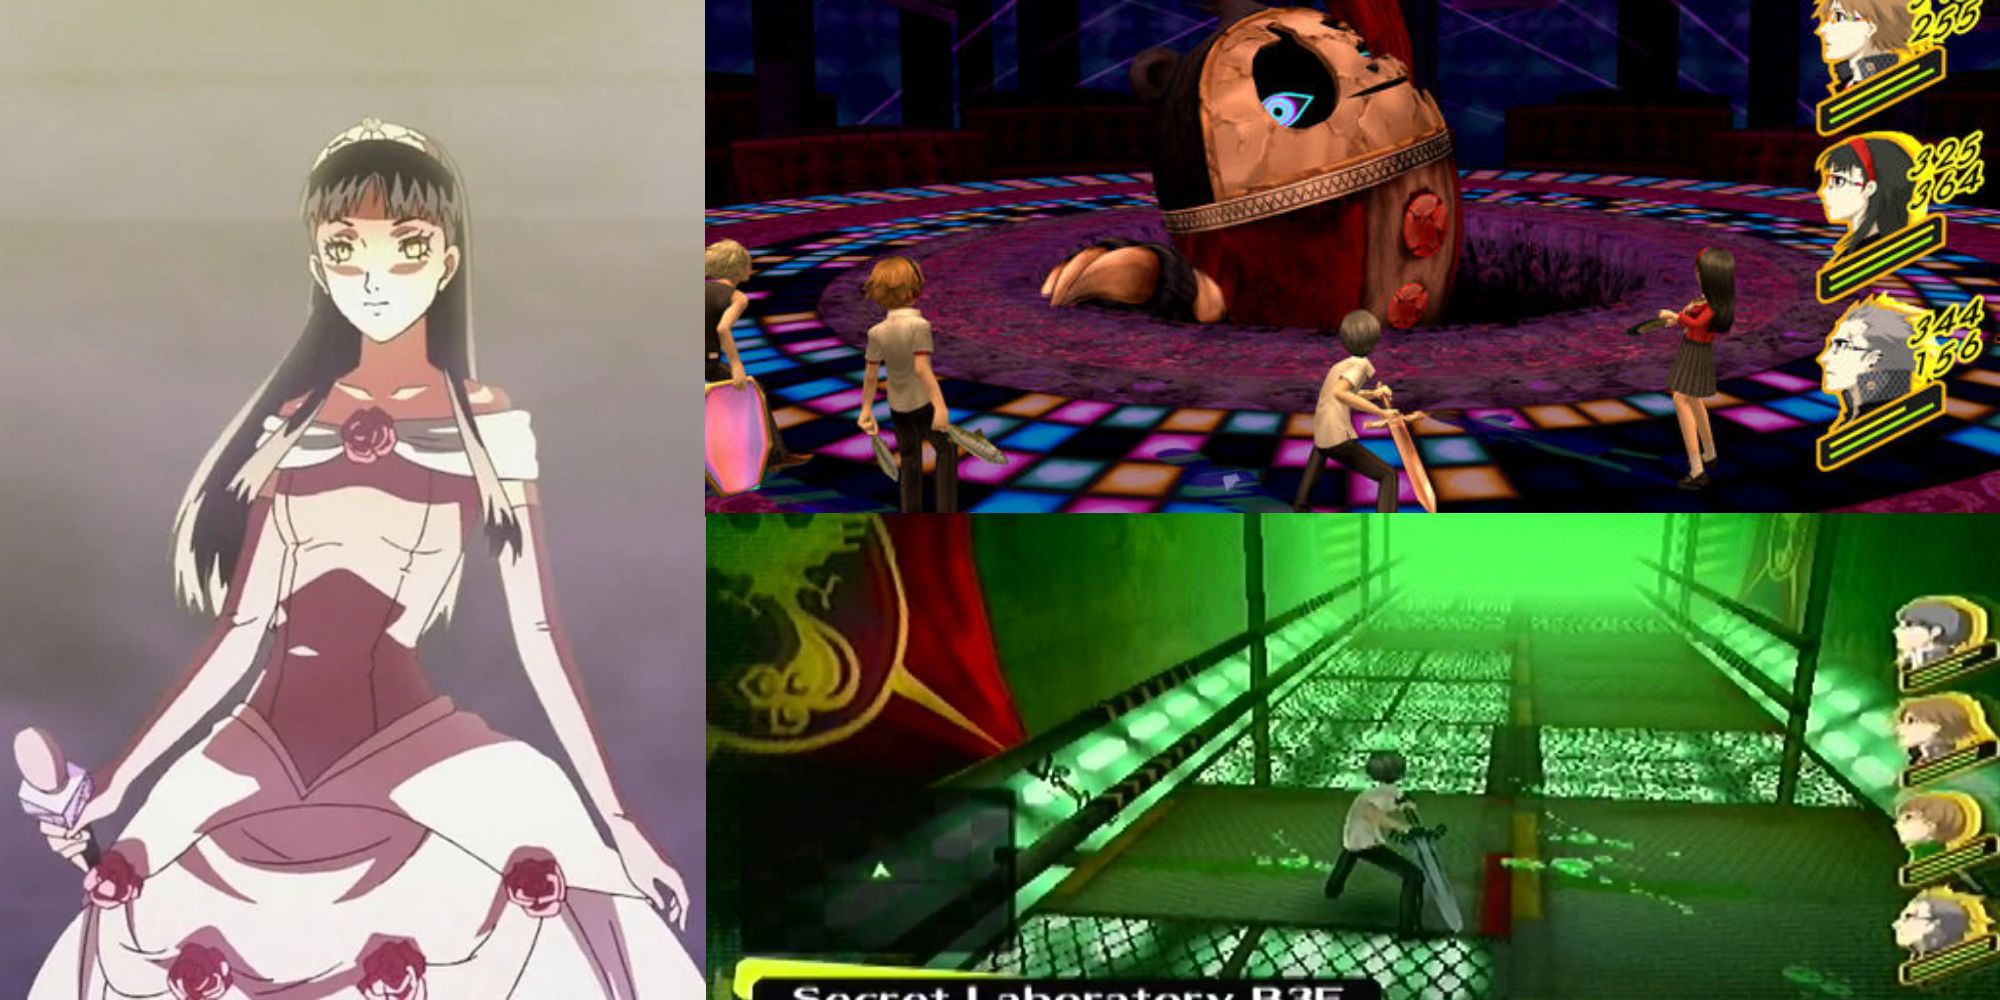 Yukiko's shadow and two examples of dungeons from the game, one showing a boss fight and the other demonstrating exploration.